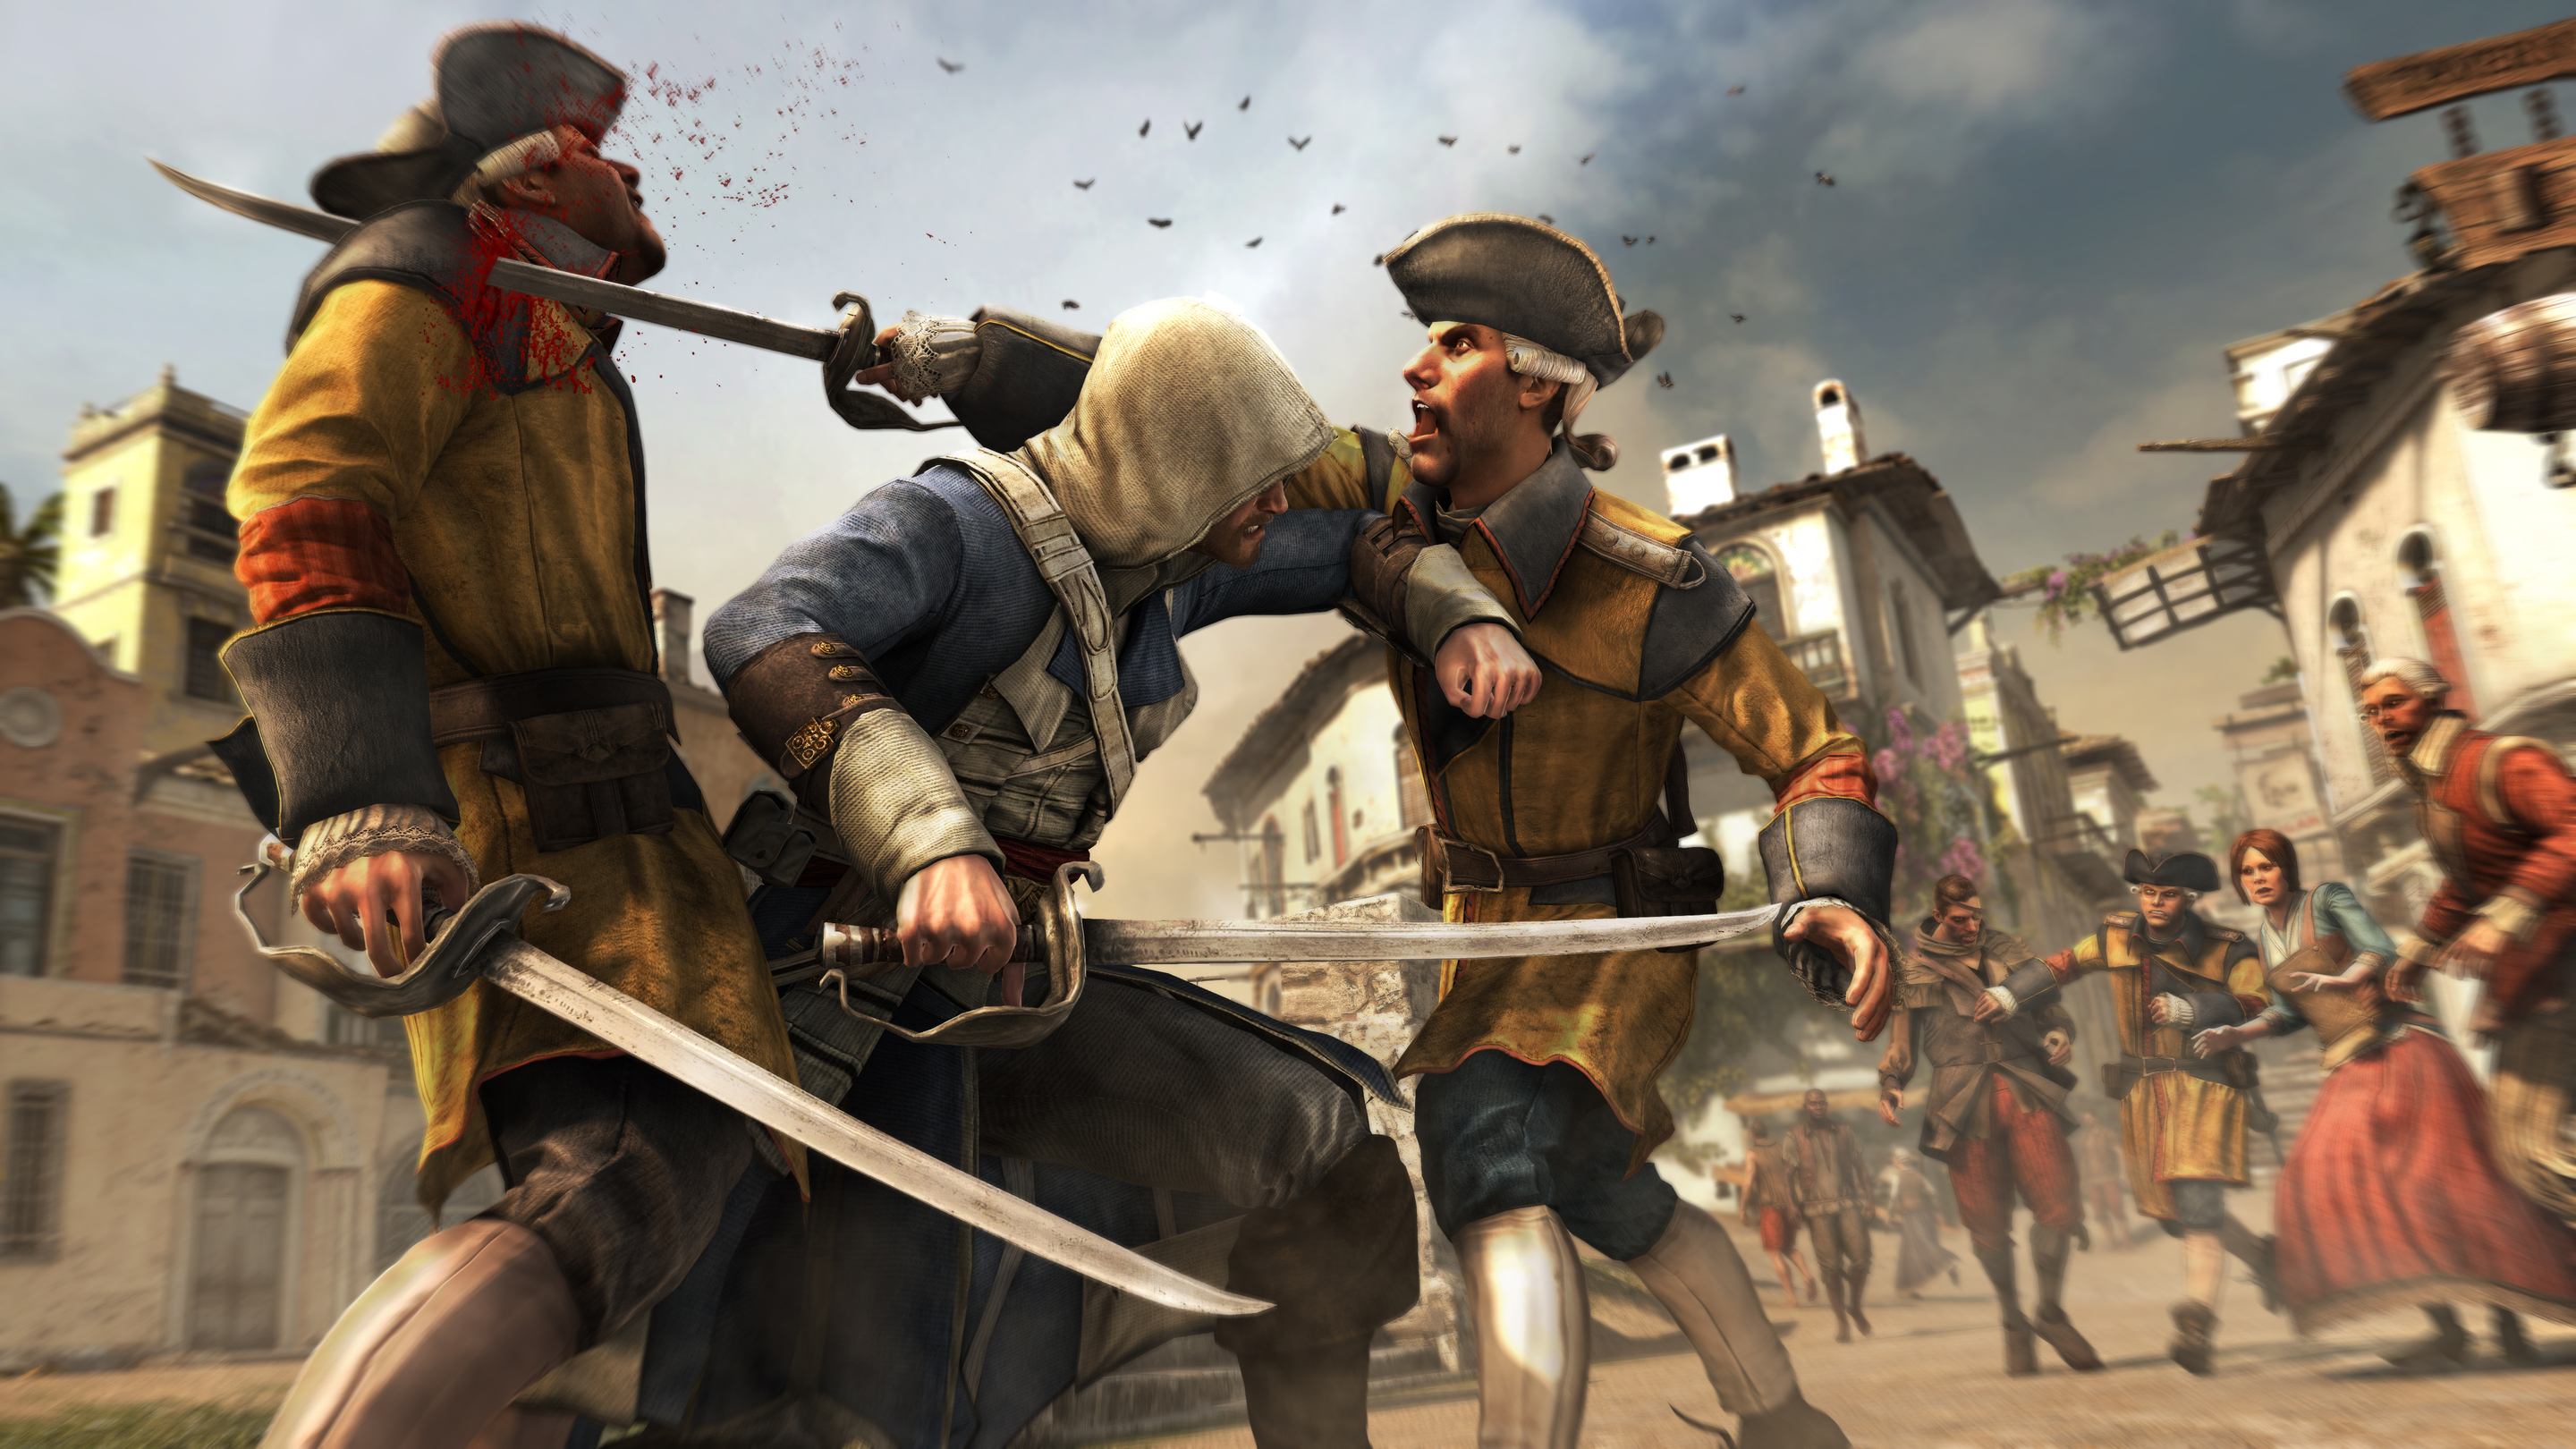 ac4 wallpaper,action adventure game,strategy video game,pc game,conquistador,battle